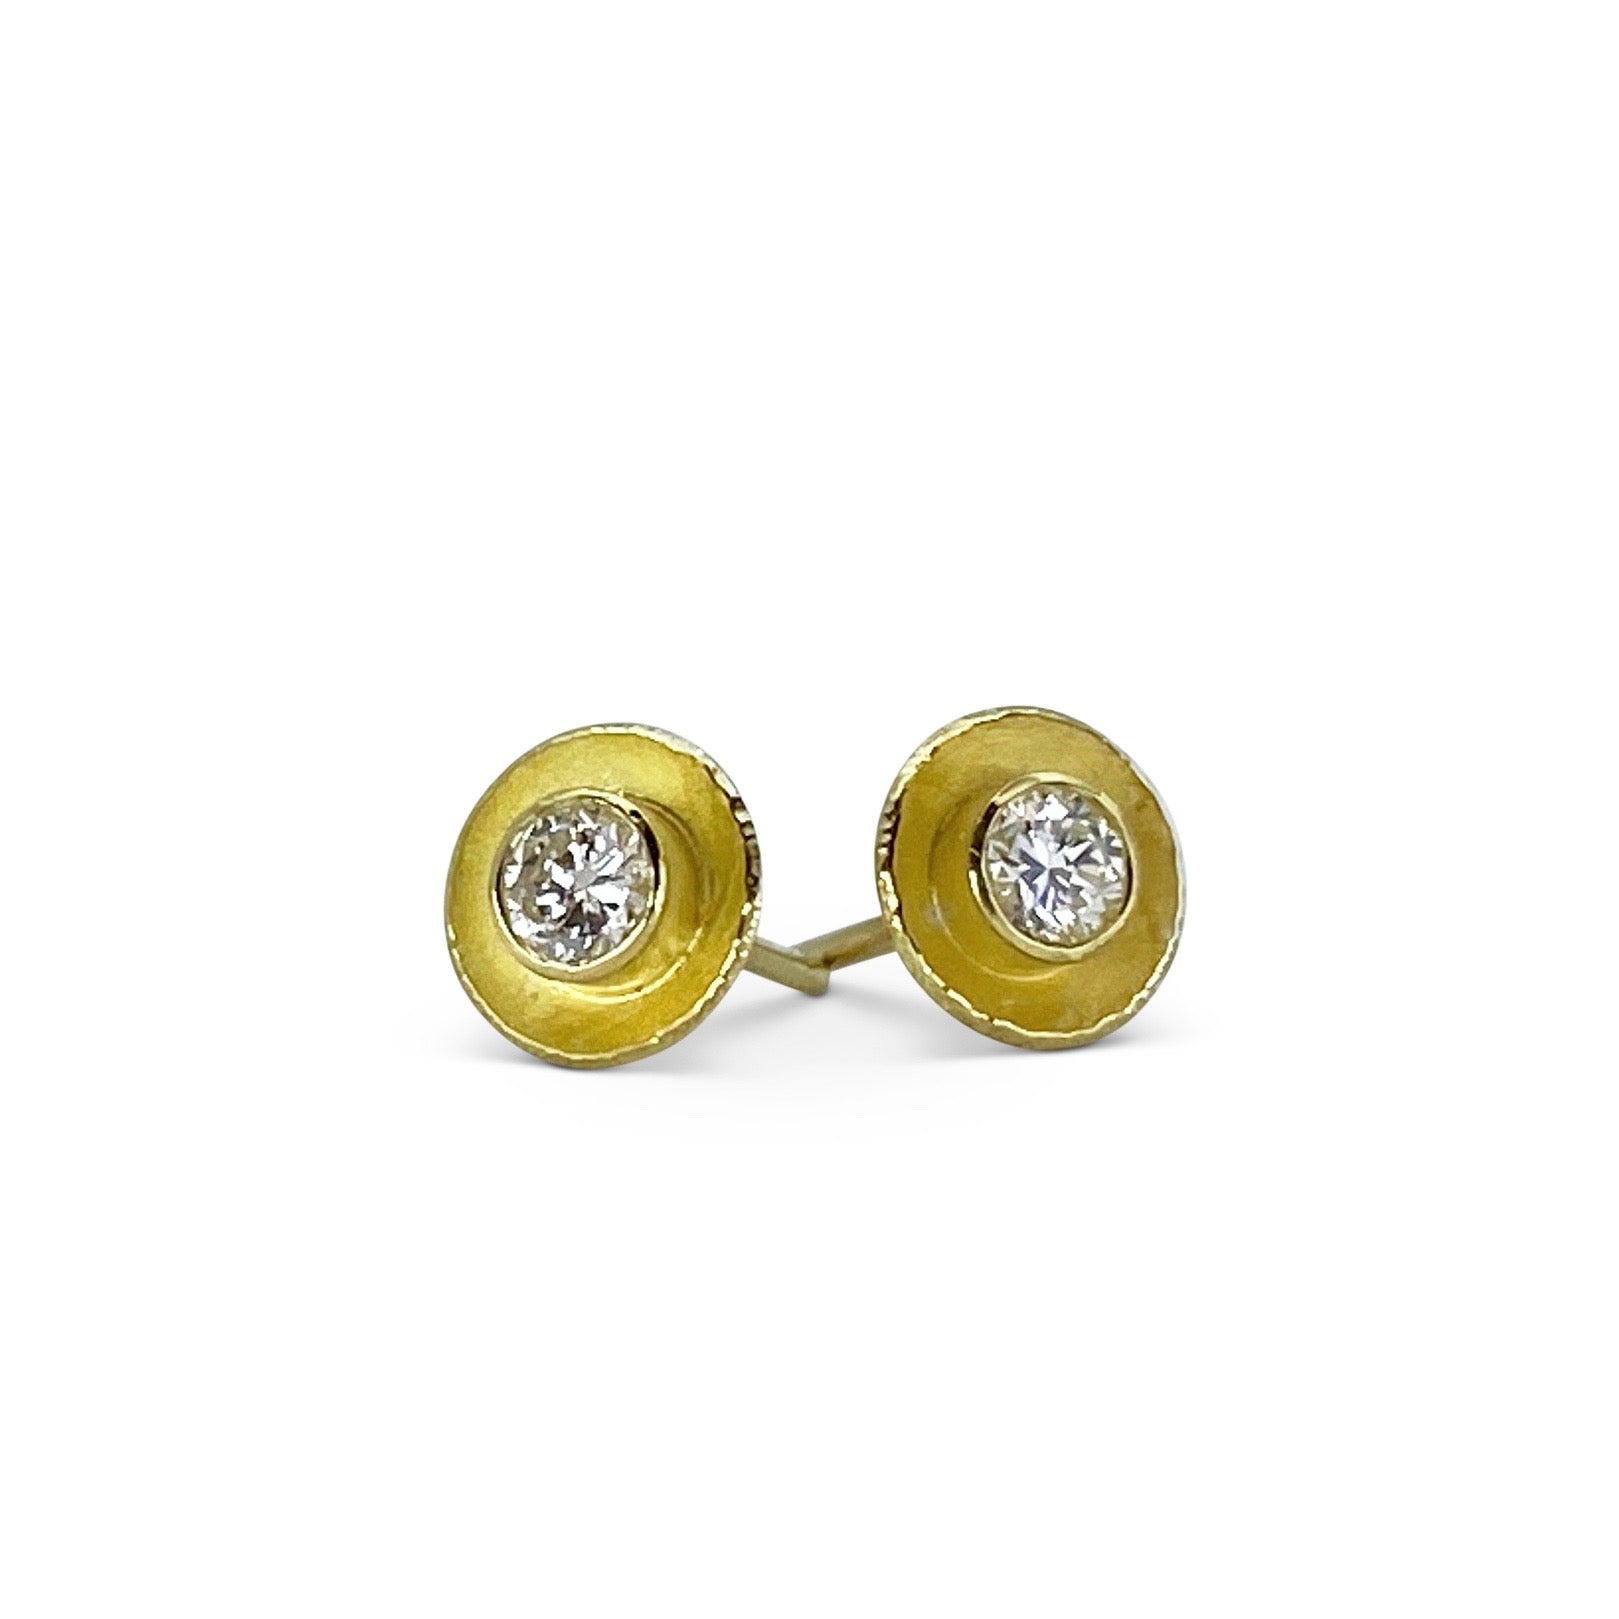 Petite concave 18K yellow gold brush finish earrings with 0.30 ct tw diamonds by Ayesha Mayadas